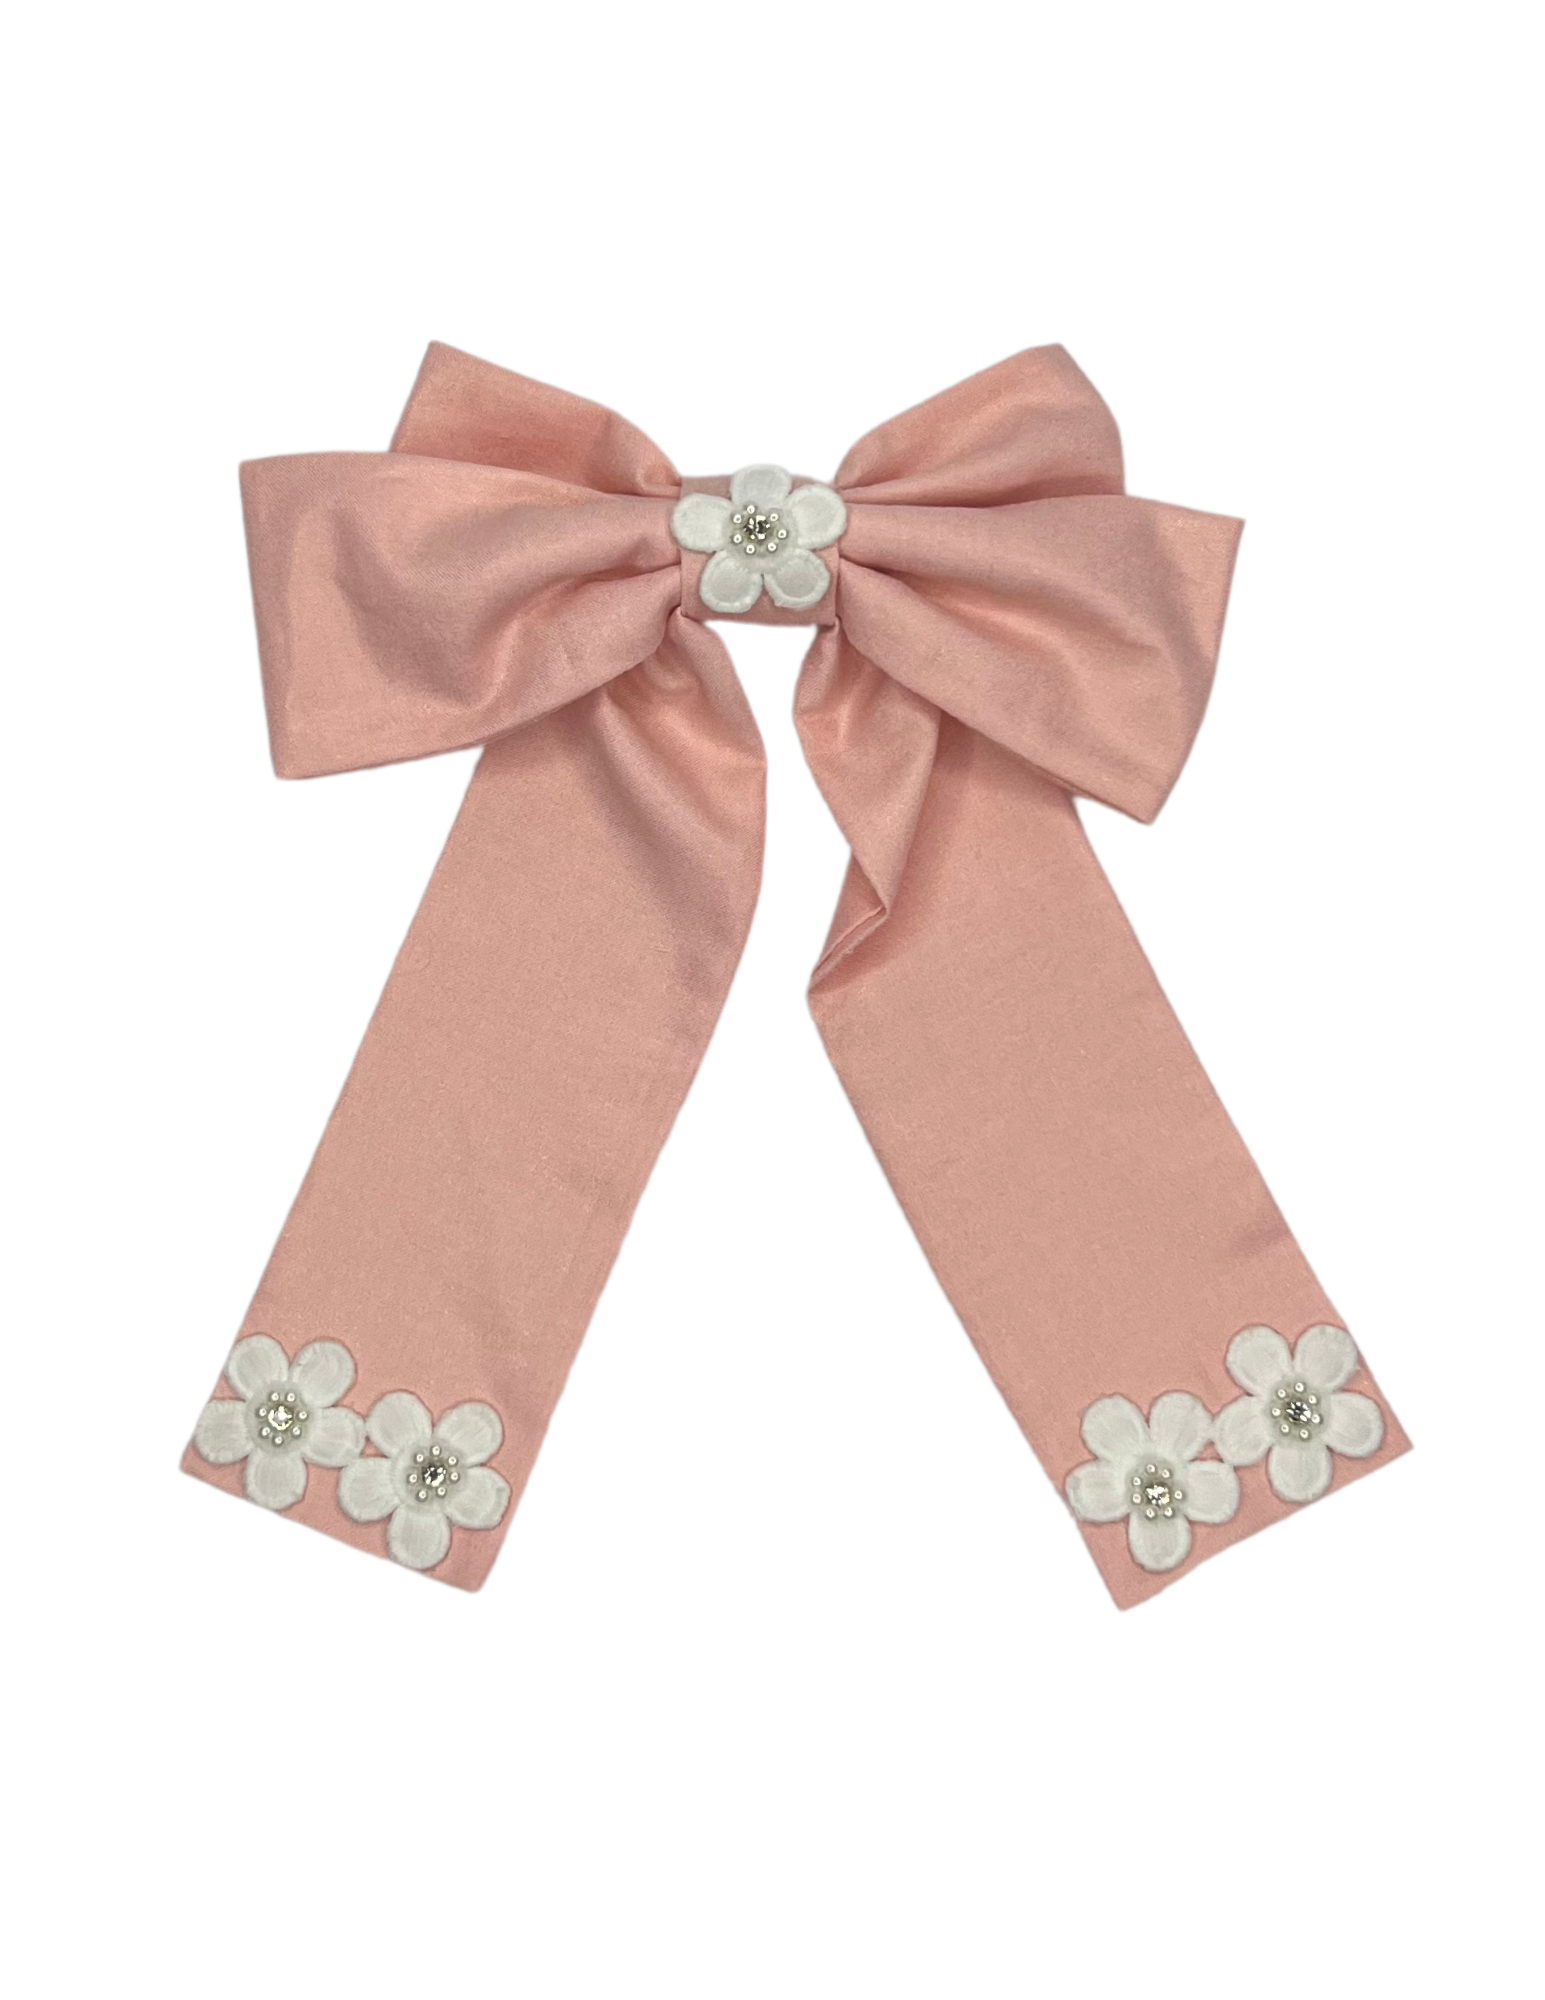 Sweet Pink with Flower Bow LG